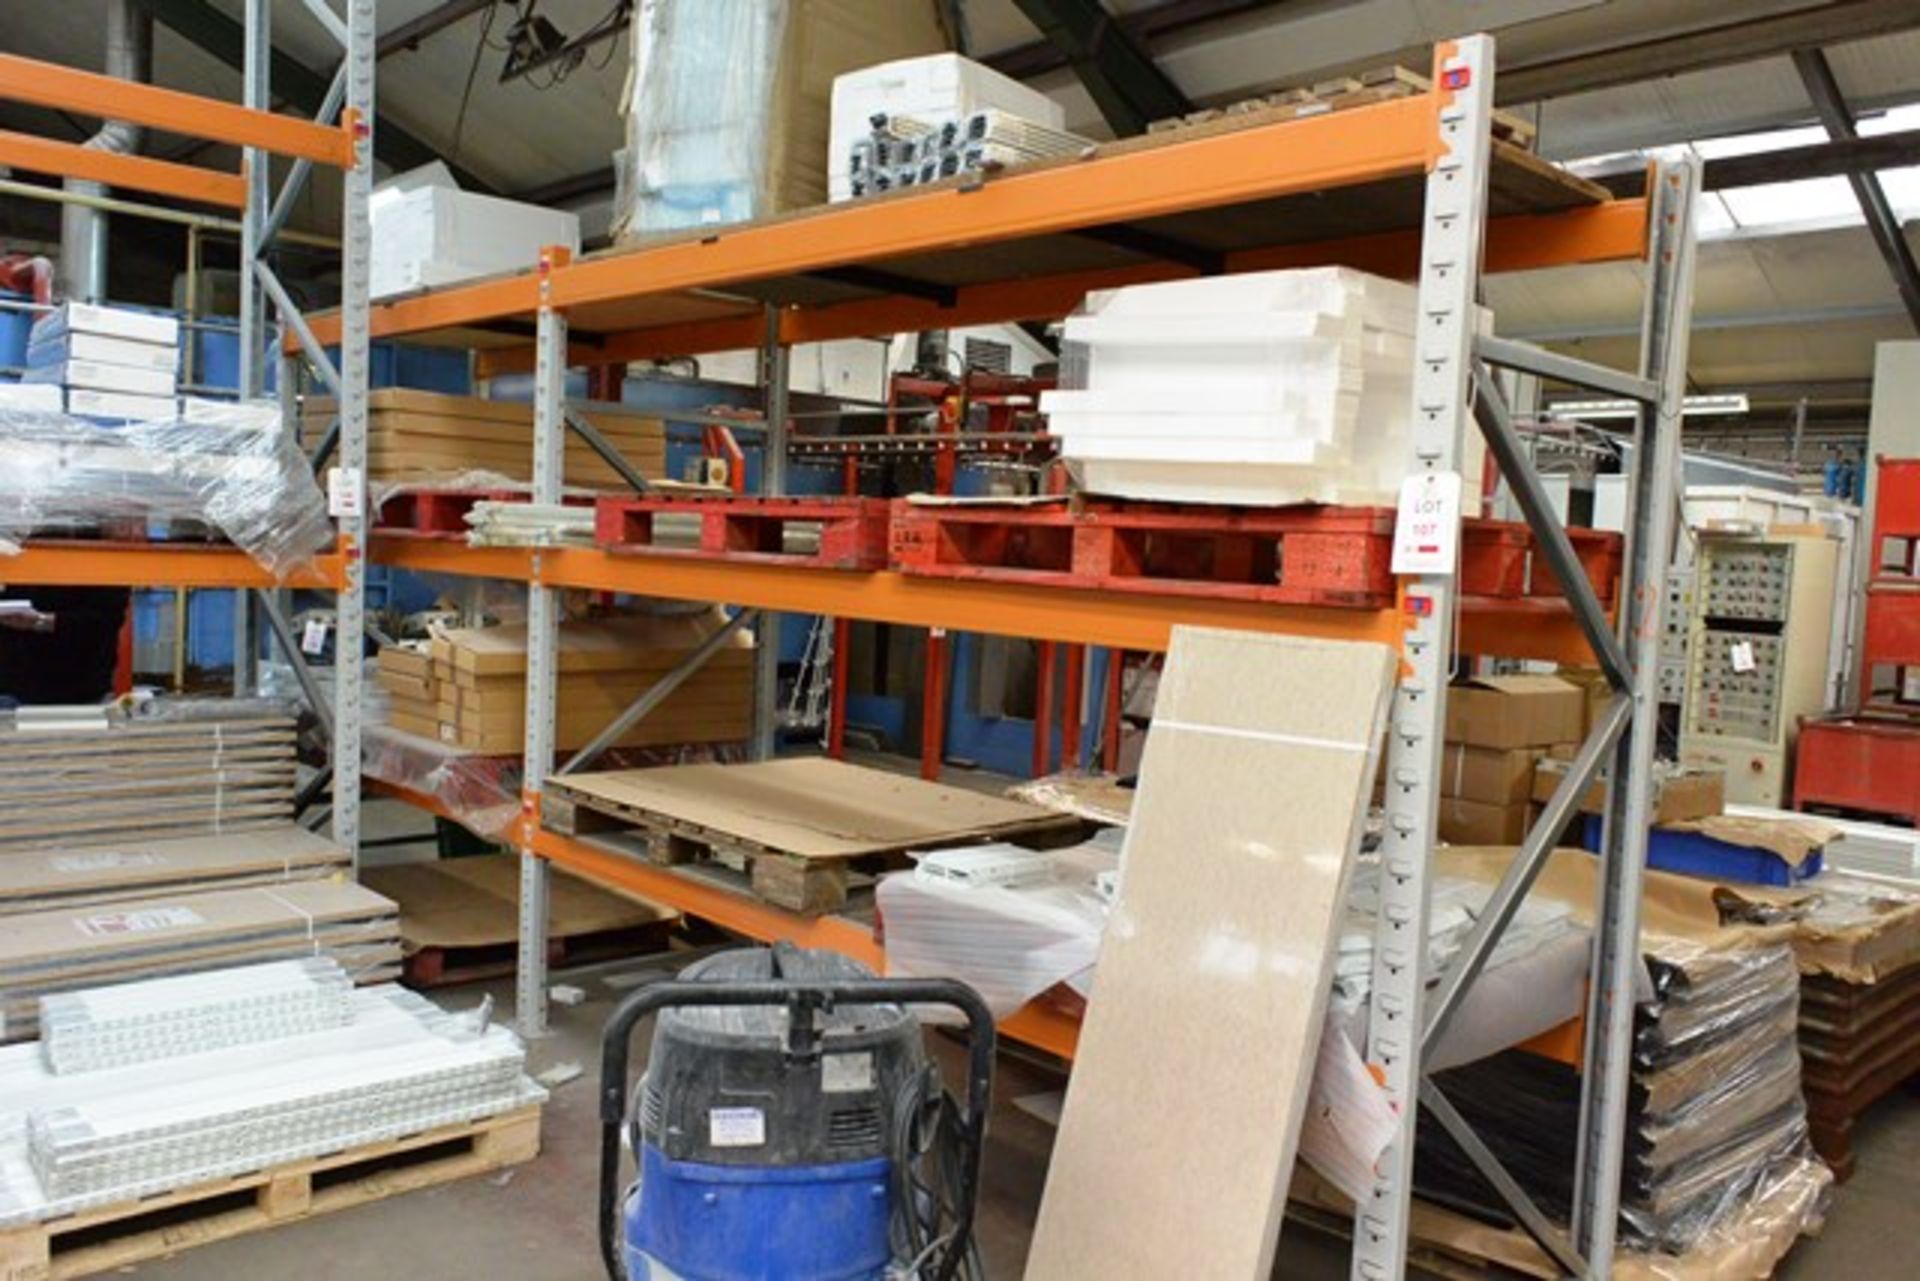 Two bays of adjustable boltless pallet racking, approx height 2.4m, approx 2 & 2.8m widths per